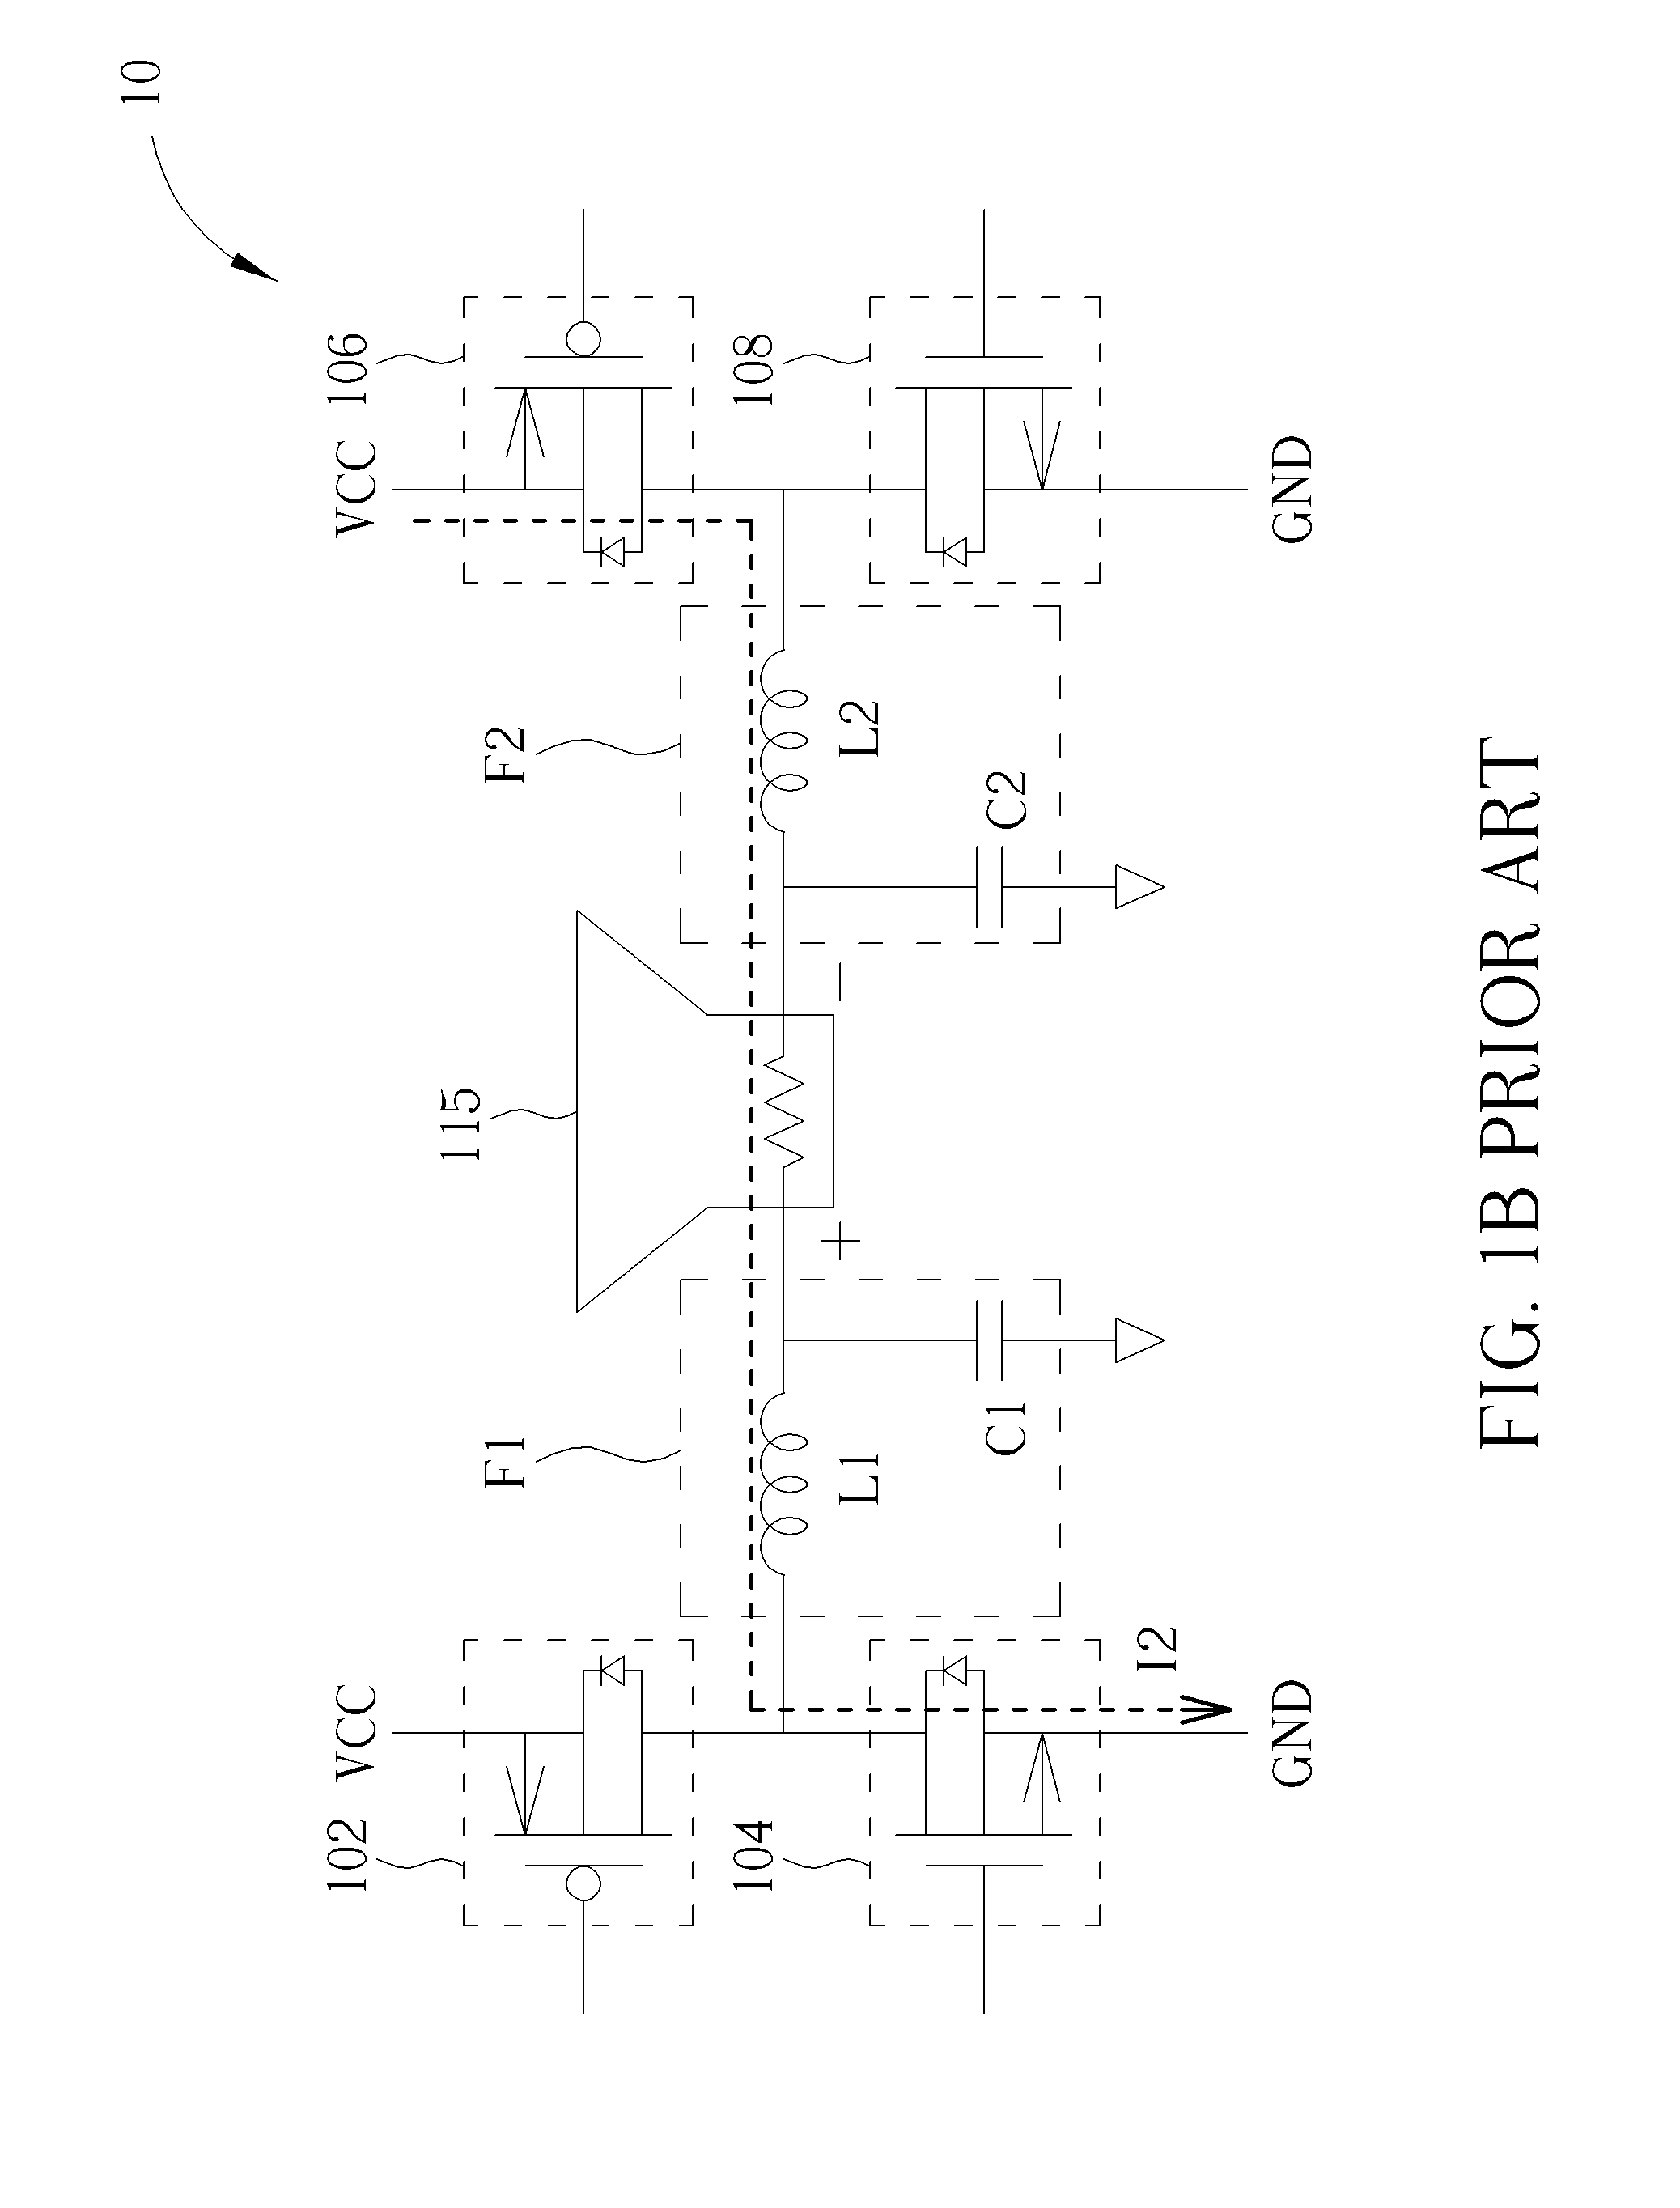 Pop-free single-ended output class-d amplifier